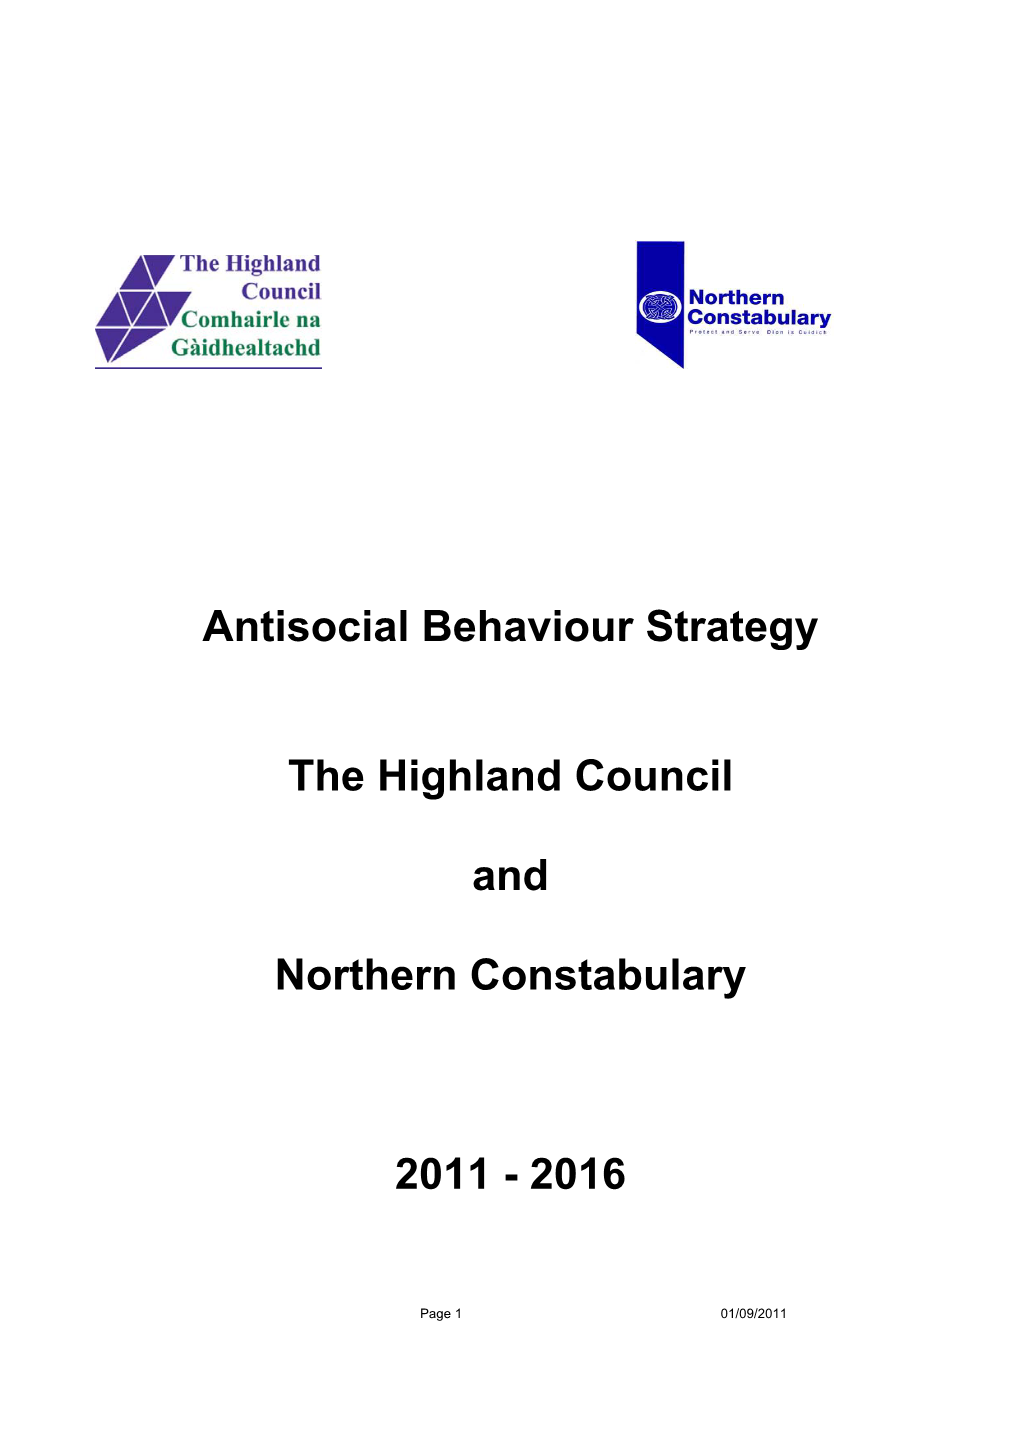 Antisocial Behaviour Strategy the Highland Council and Northern Constabulary 2011